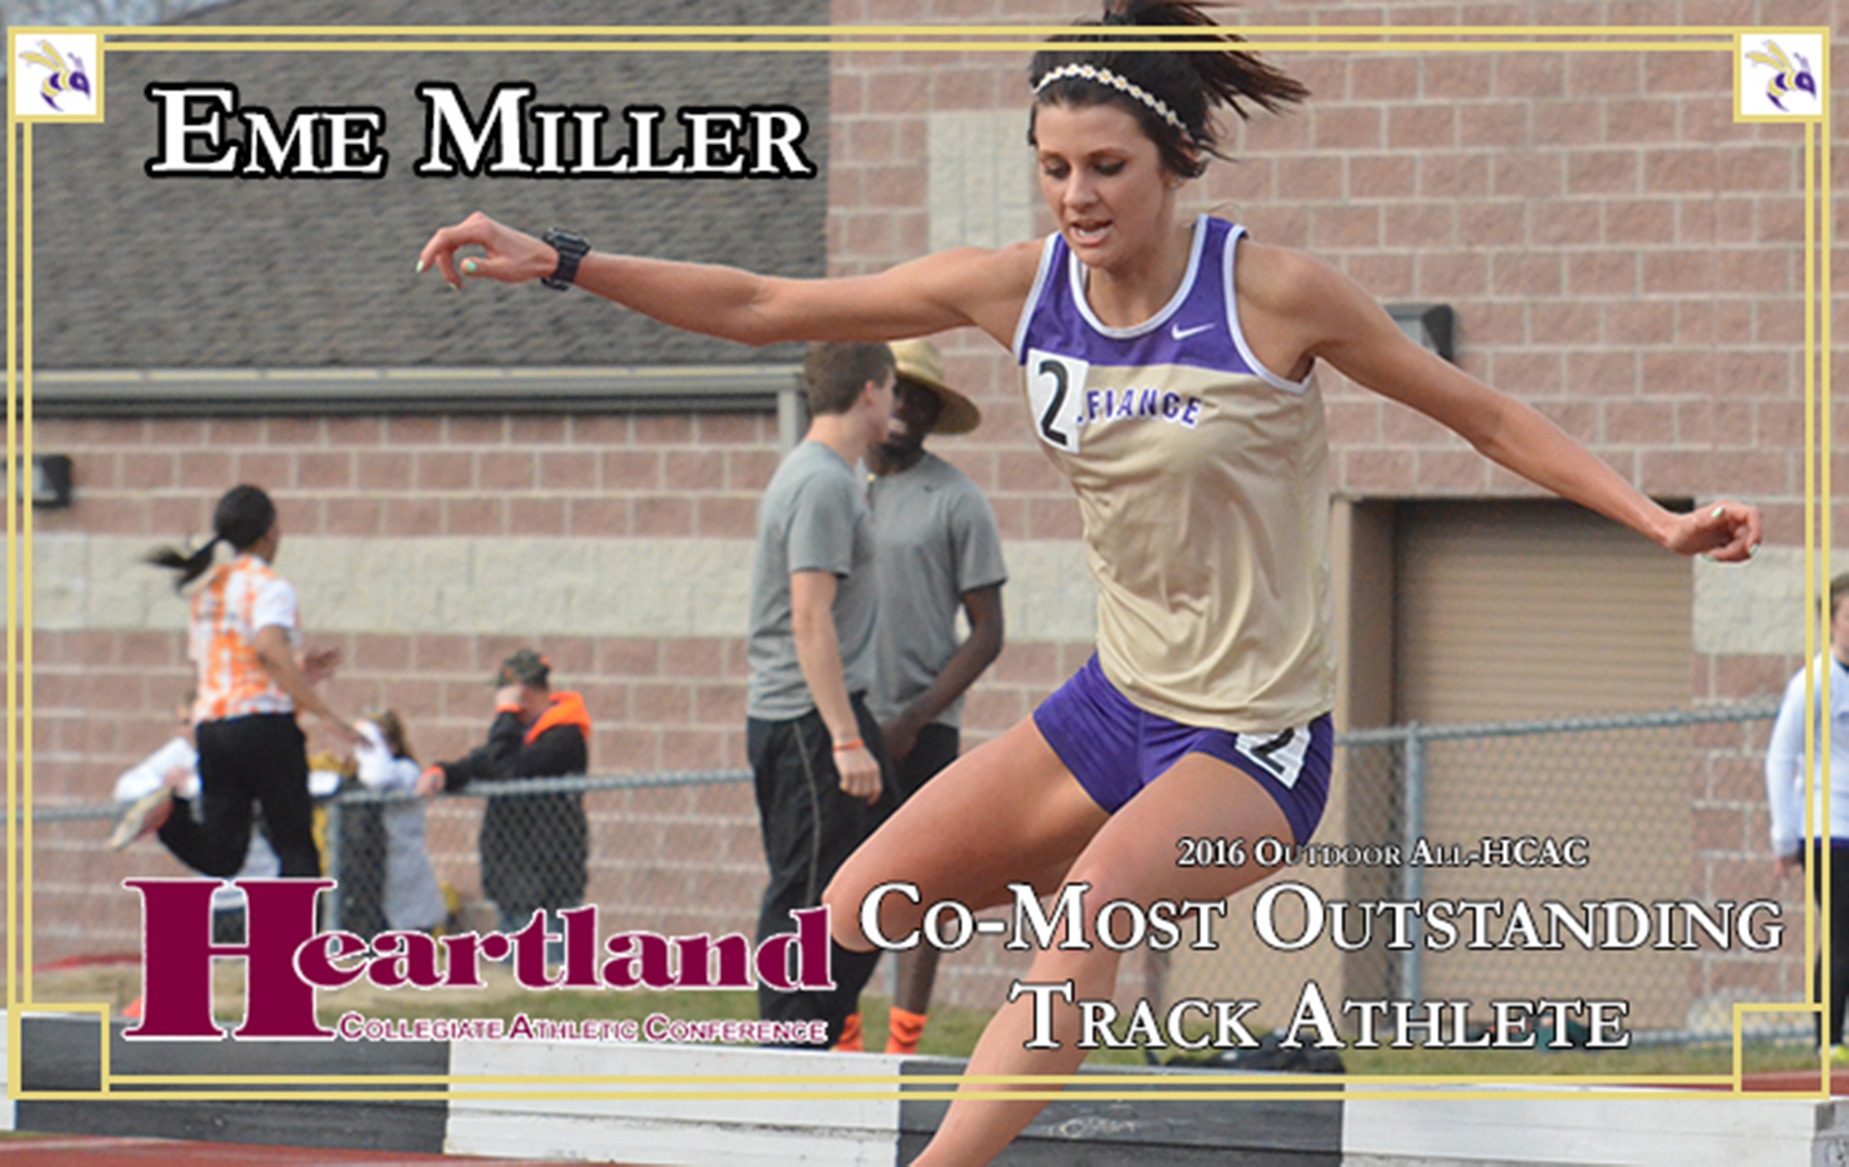 Four Tracksters Earn All-HCAC; Miller Named Co-MVP